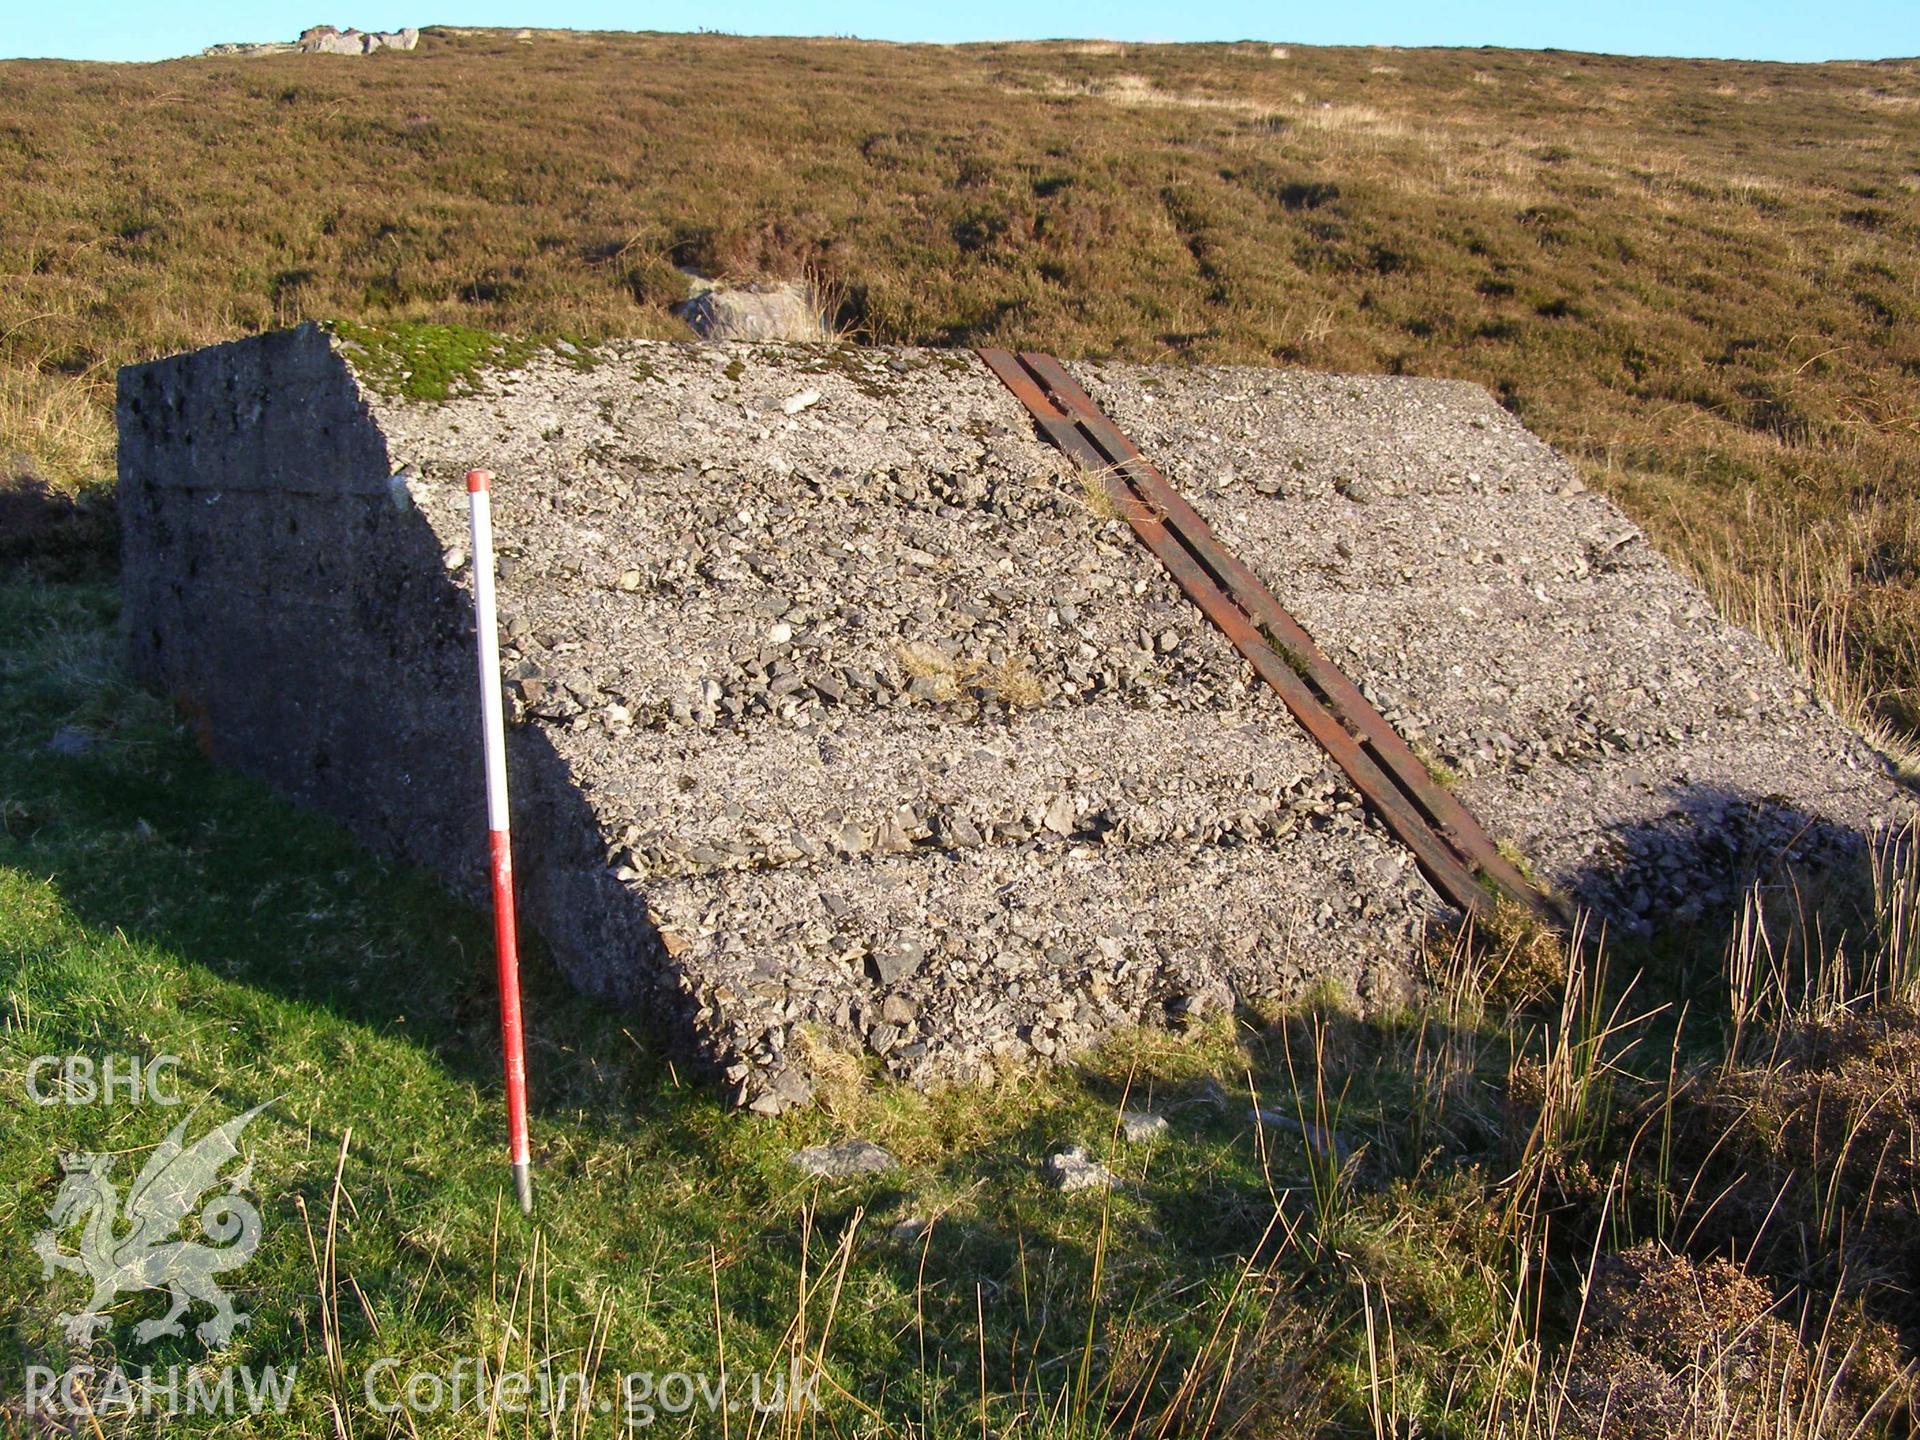 Digital colour photograph of Cefn Du Radio Station, concrete base XLIV taken on 10/12/2007 by P.J. Schofield during the Snowdon North West Upland Survey undertaken by Oxford Archaeology North.